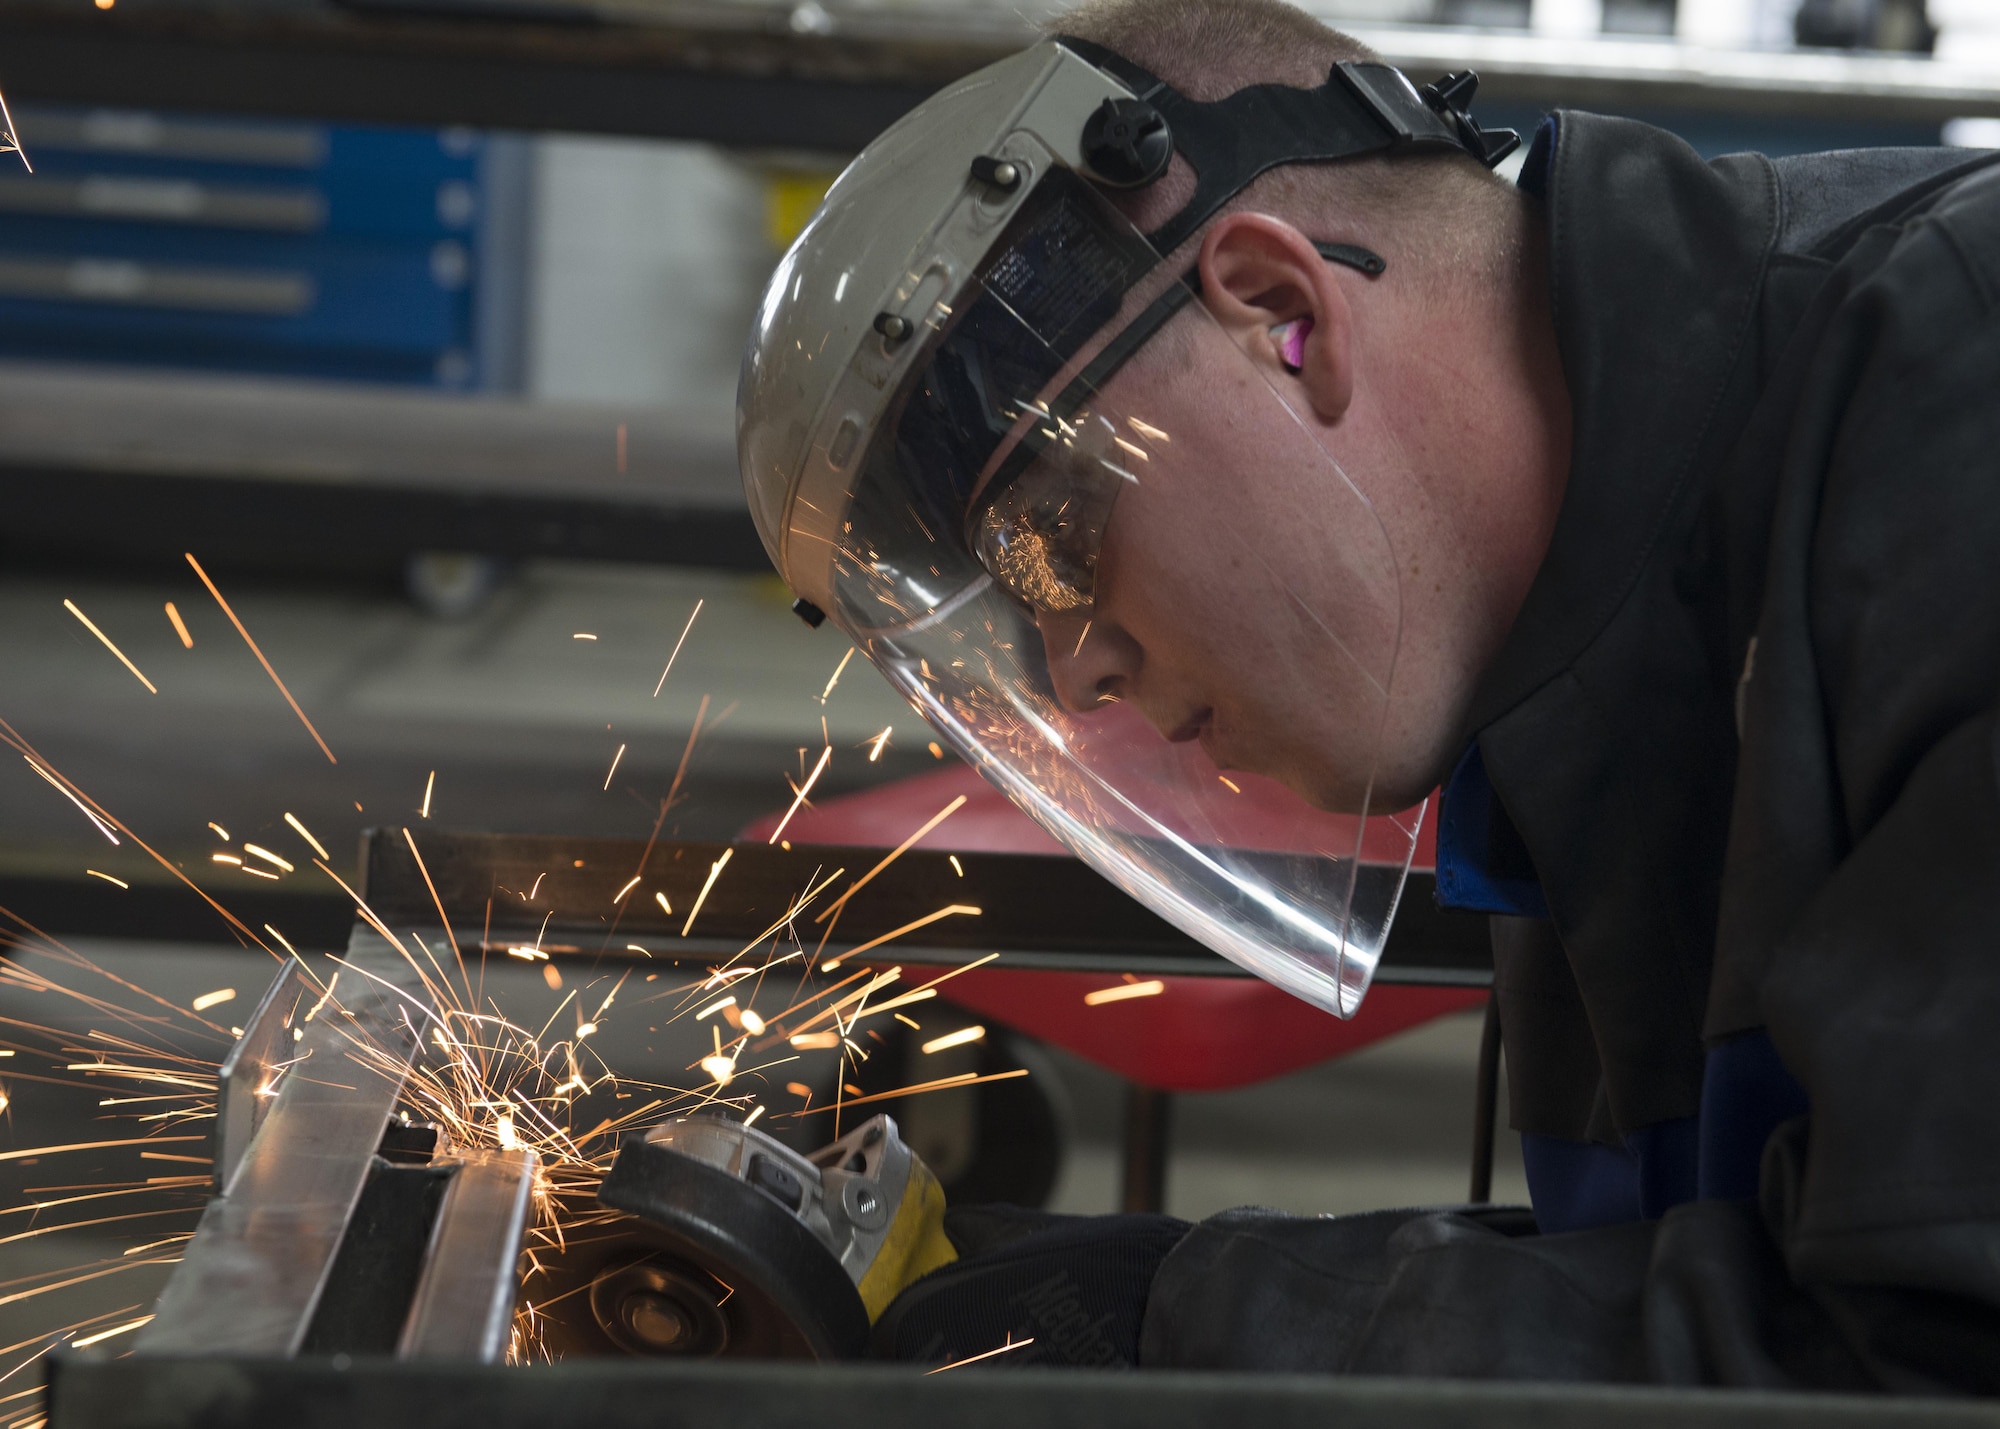 Senior Airman Cory Swan, 512th Maintenance Squadron metals technician, uses an angle grinder to remove a piece of metal from a metal frame Sept. 19, 2016, at Dover Air Force Base, Del. The Aircraft Metals Technology Shop worked hand-in-hand with the Air Force Mortuary Affairs Operations to ensure the success of the dignified transfer mission by designing and fabricating a custom frame for AFMAO’s new transfer vehicles. (U.S. Air Force photo by Senior Airman Zachary Cacicia)